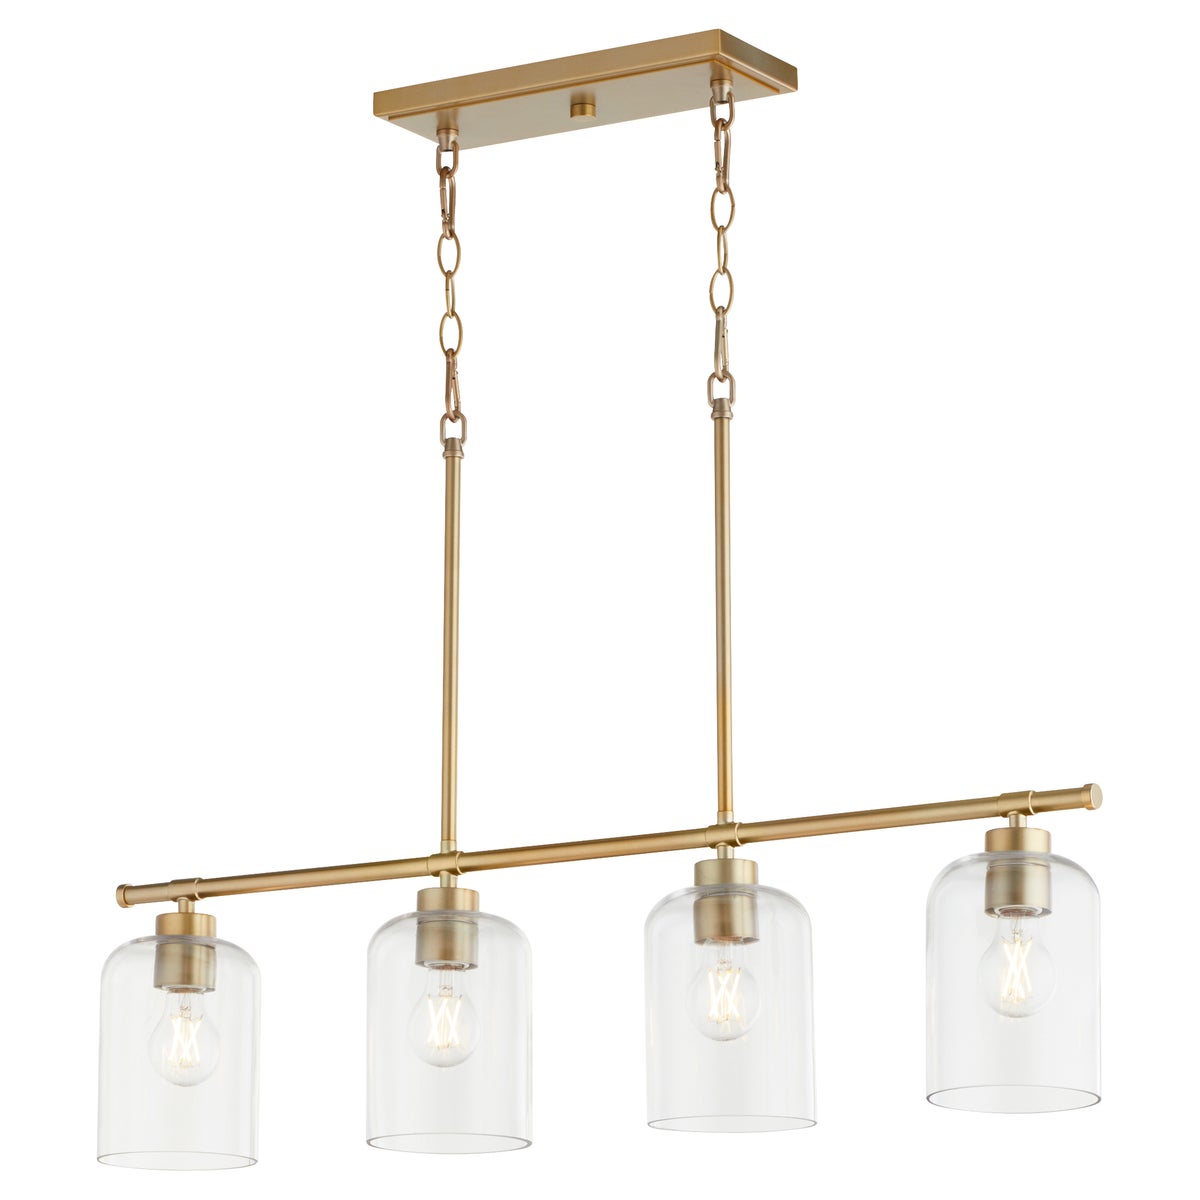 Kitchen Pendant Light with clear glass shades on linear frames. Choose from matte black, aged brass, or satin nickel finishes. Indoor/outdoor use. 100W, 4 bulbs, dimmable. UL Listed, Damp Location. 2-year warranty. 5&quot;W x 9.5&quot;H x 35&quot;L.